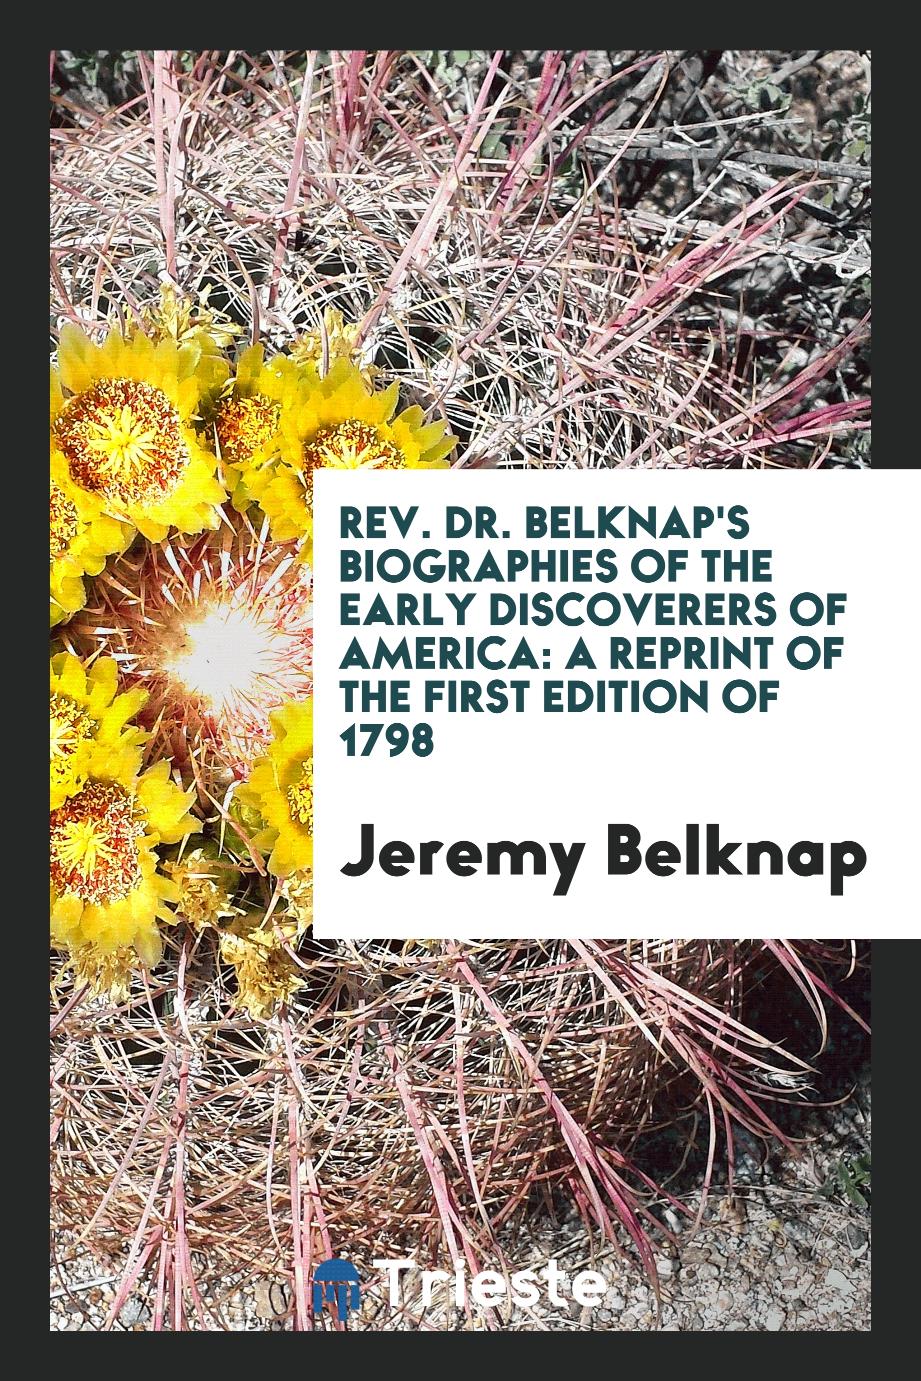 Rev. Dr. Belknap's Biographies of the early discoverers of America: a reprint of the first edition of 1798